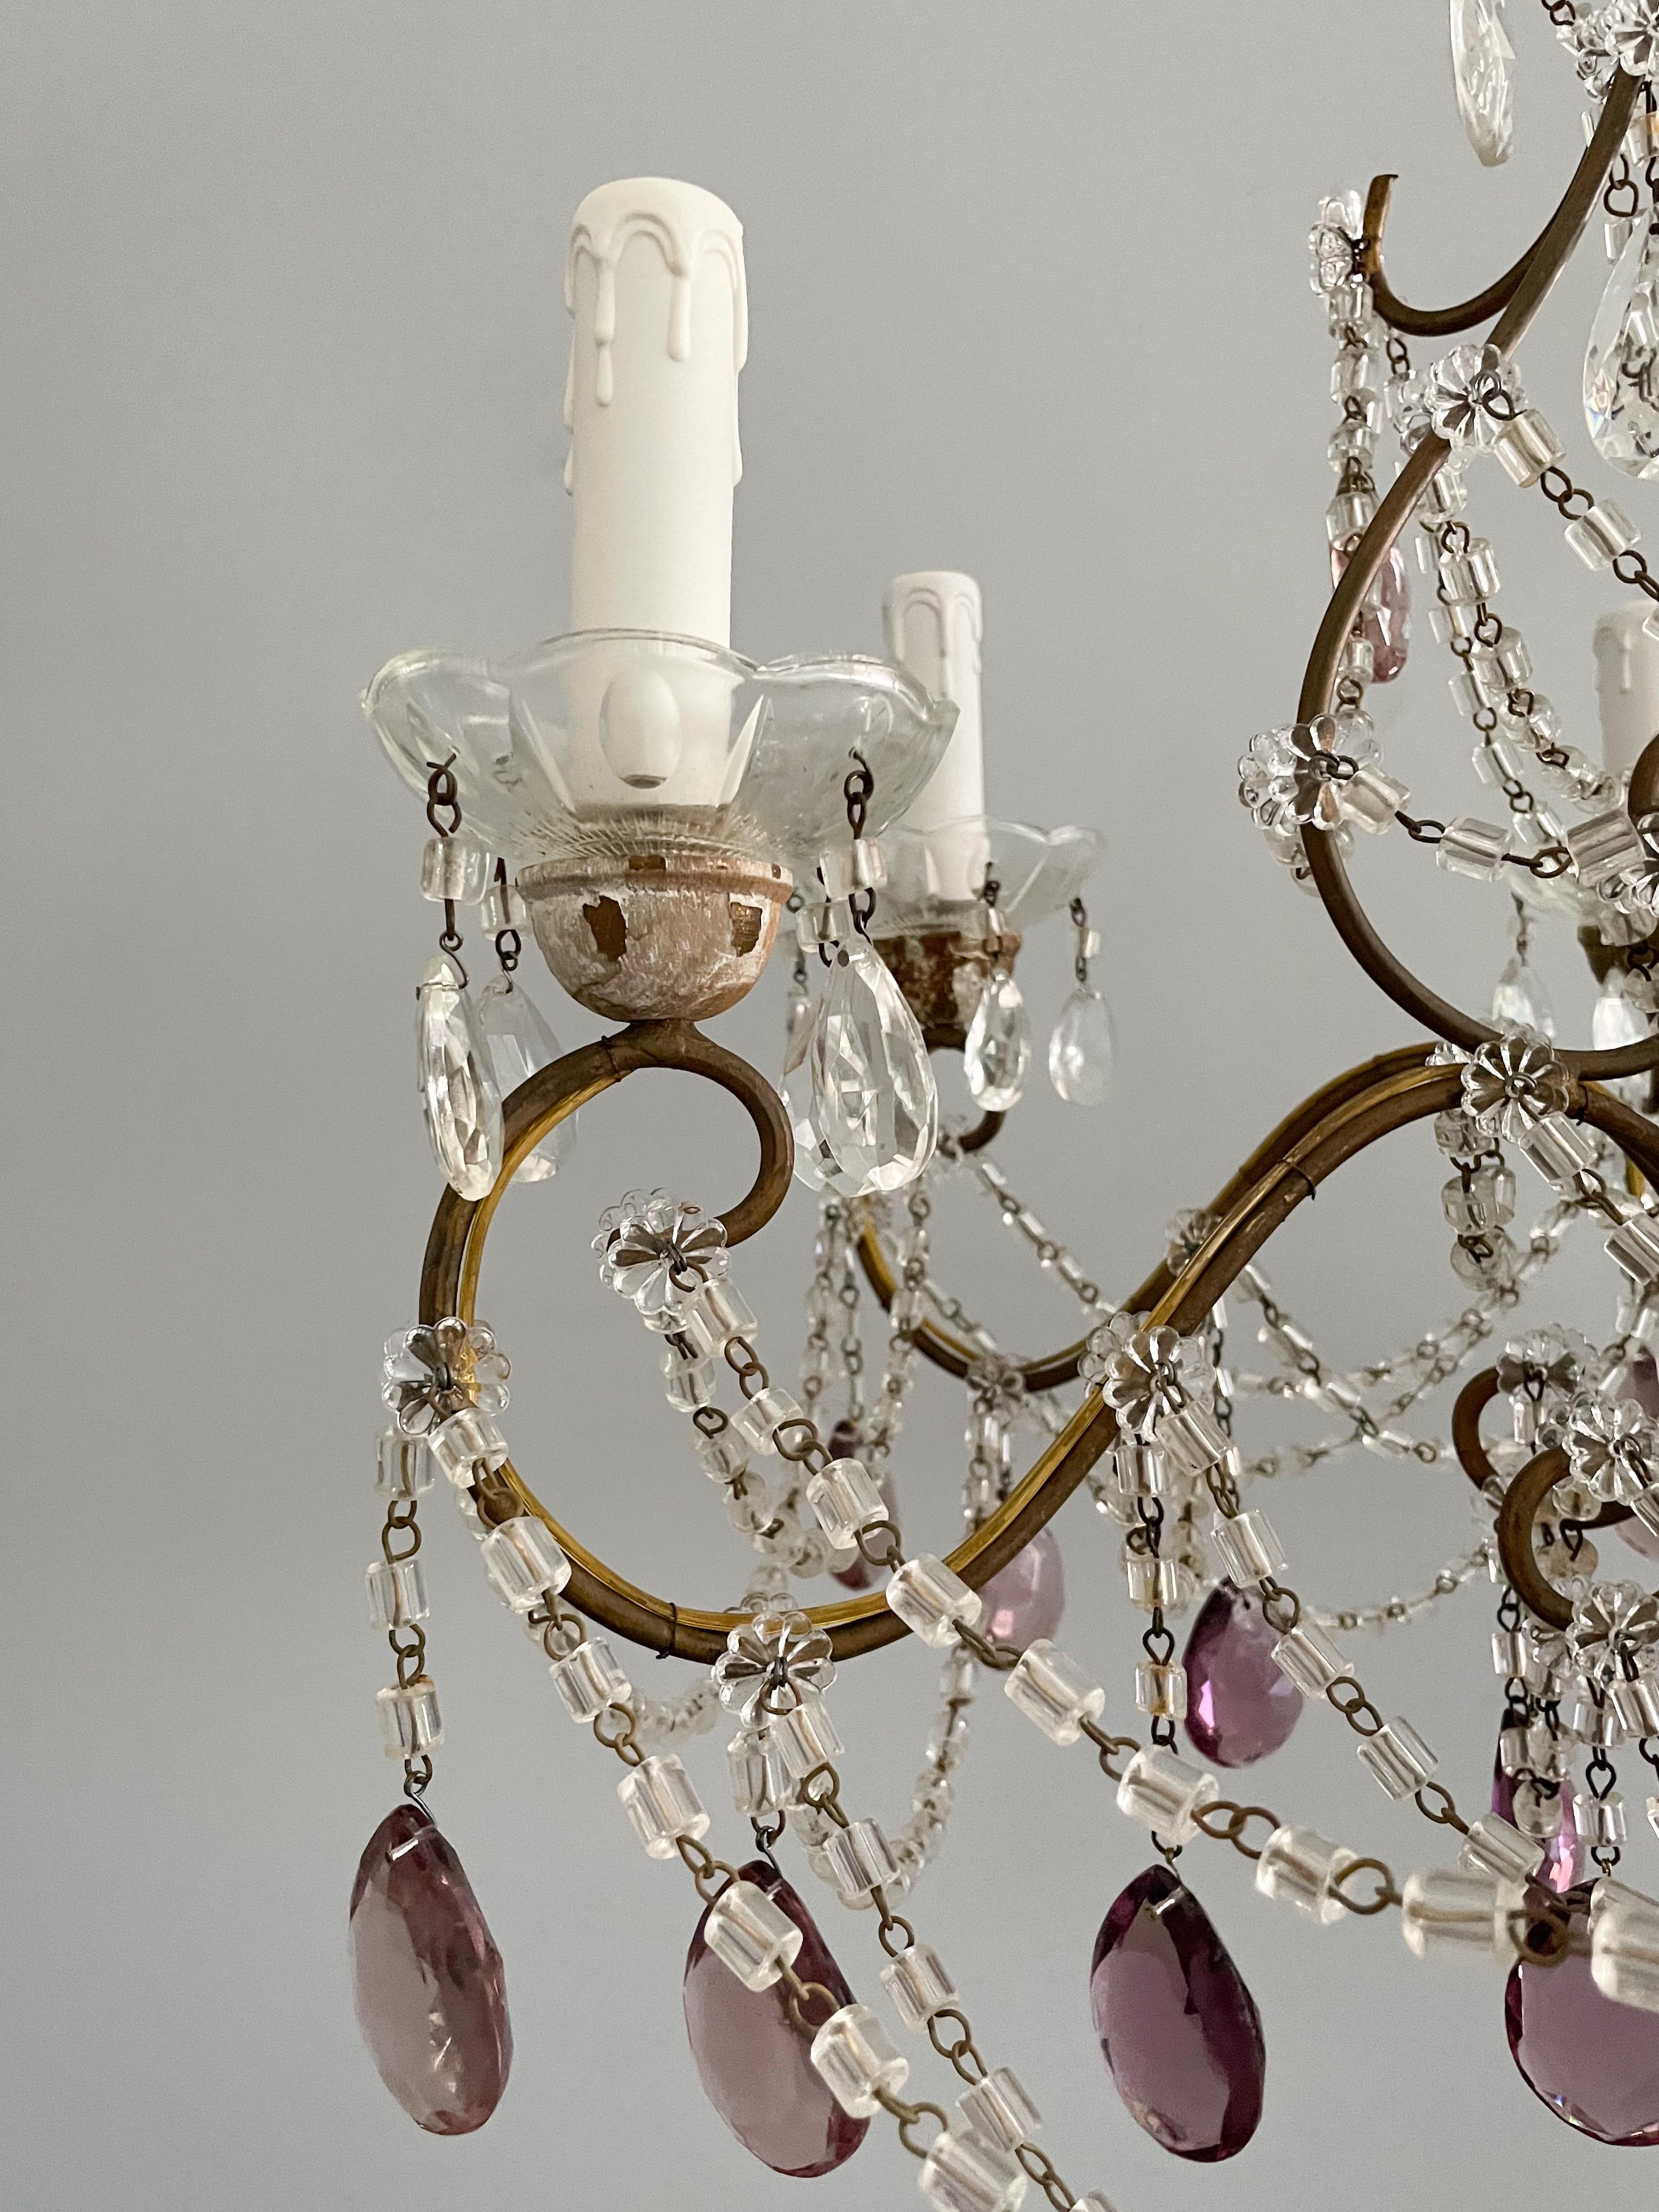 Early 20th Century Italian Gilt Iron and Crystal Chandelier with Amethyst Prisms